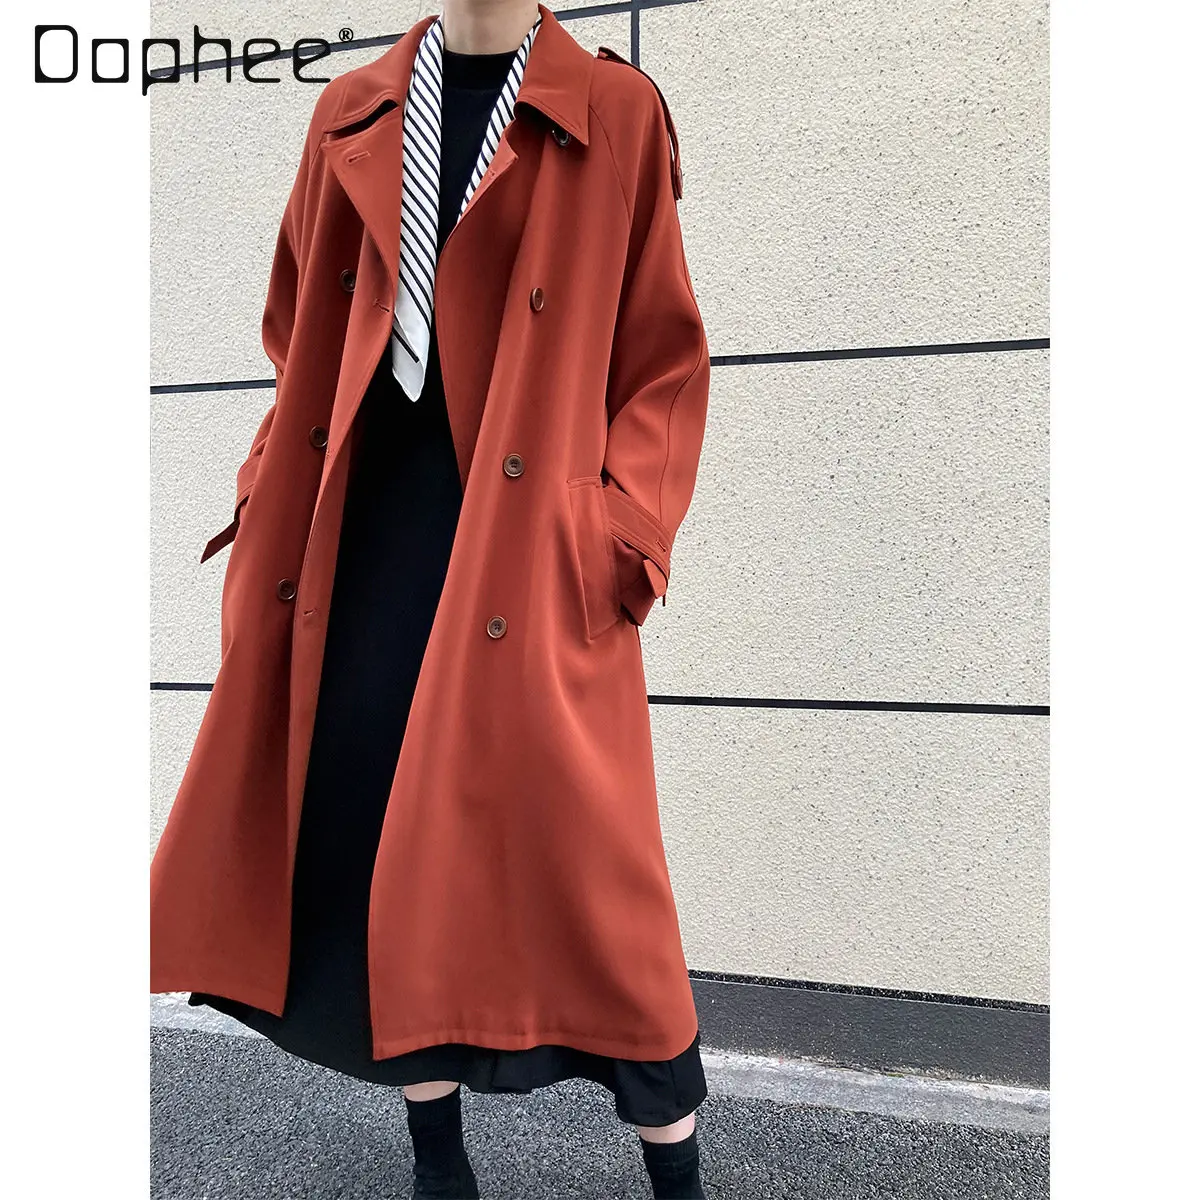 Autumn New Casual Loose Drooping Mid-Length Below The Knee Trench Coat for Women Fashion Trend Luxury Coat Jacket for Ladies